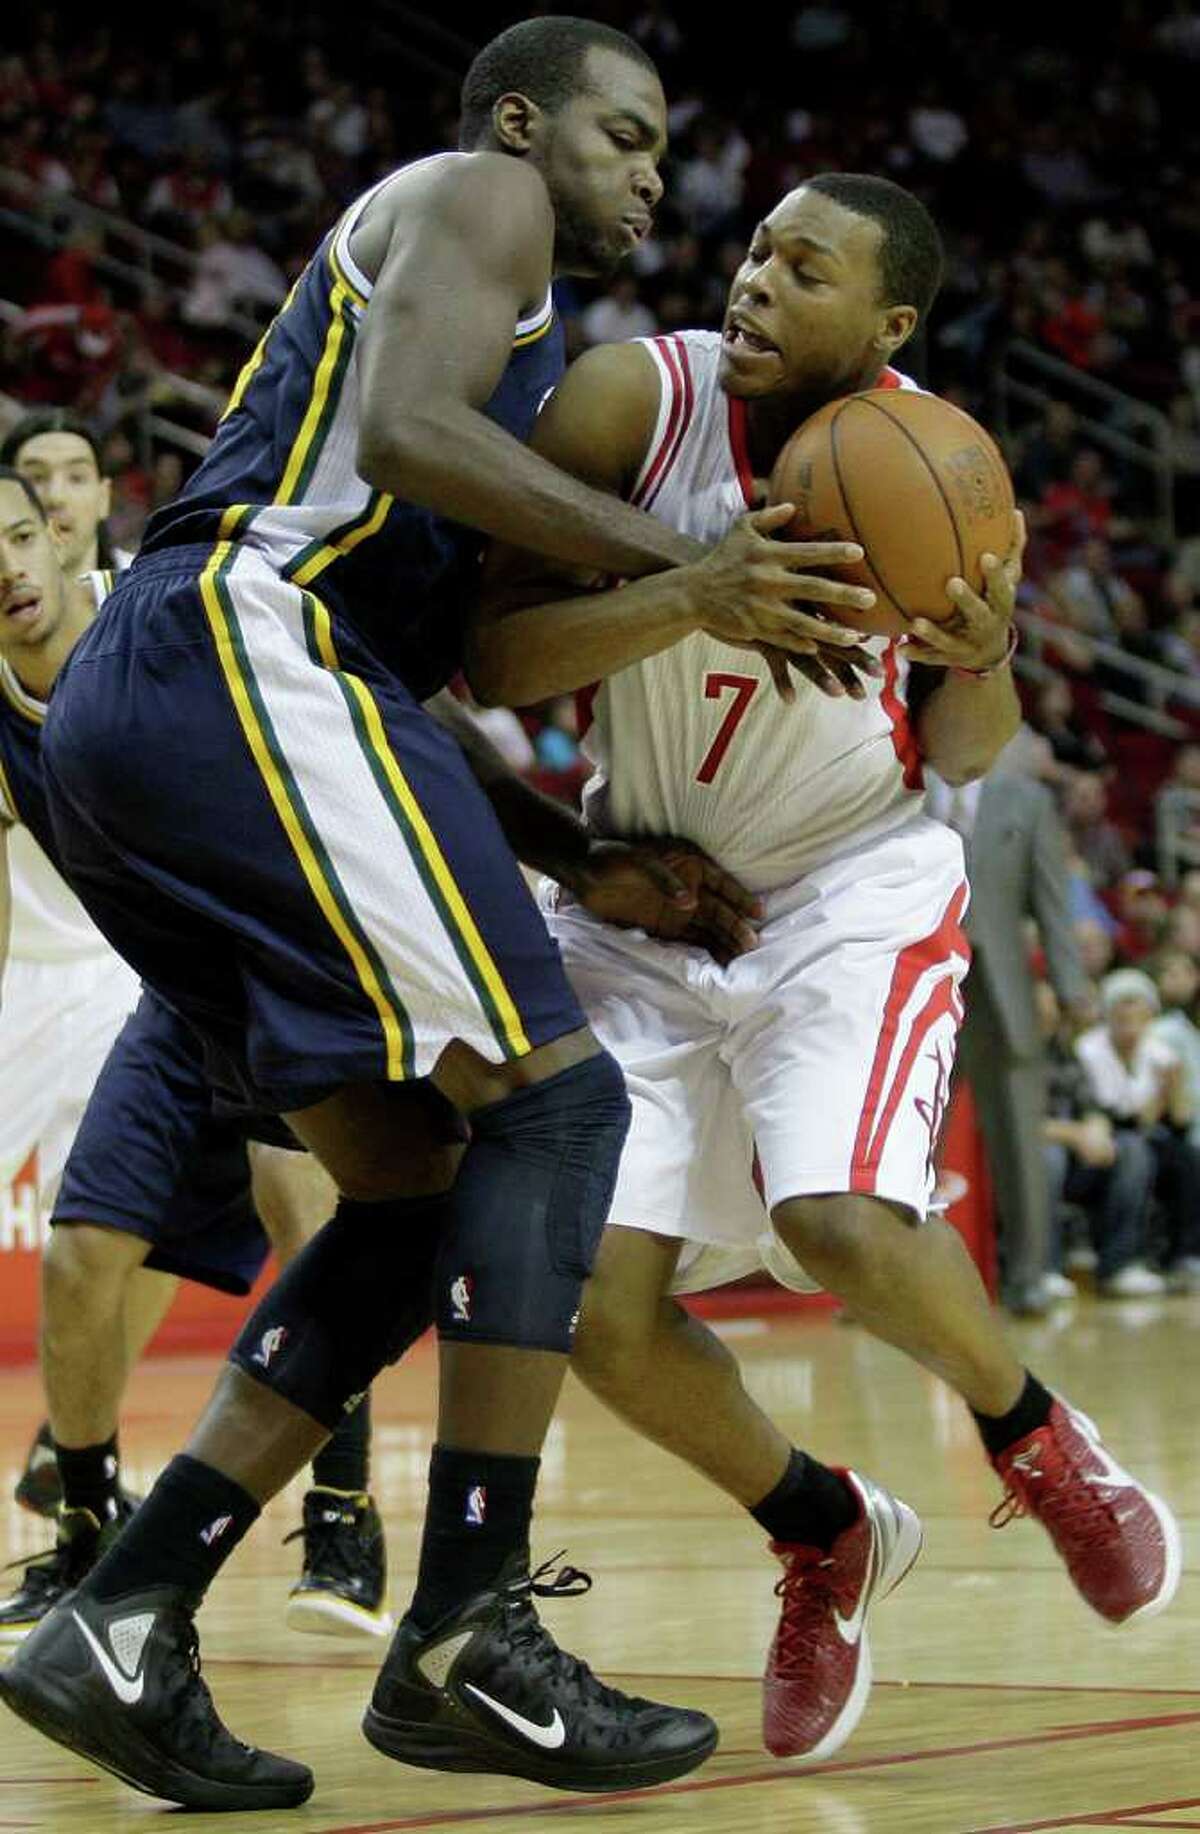 Utah's Paul Millsap roughs up Kyle Lowry, who burned the Jazz for 32 points Sunday night.